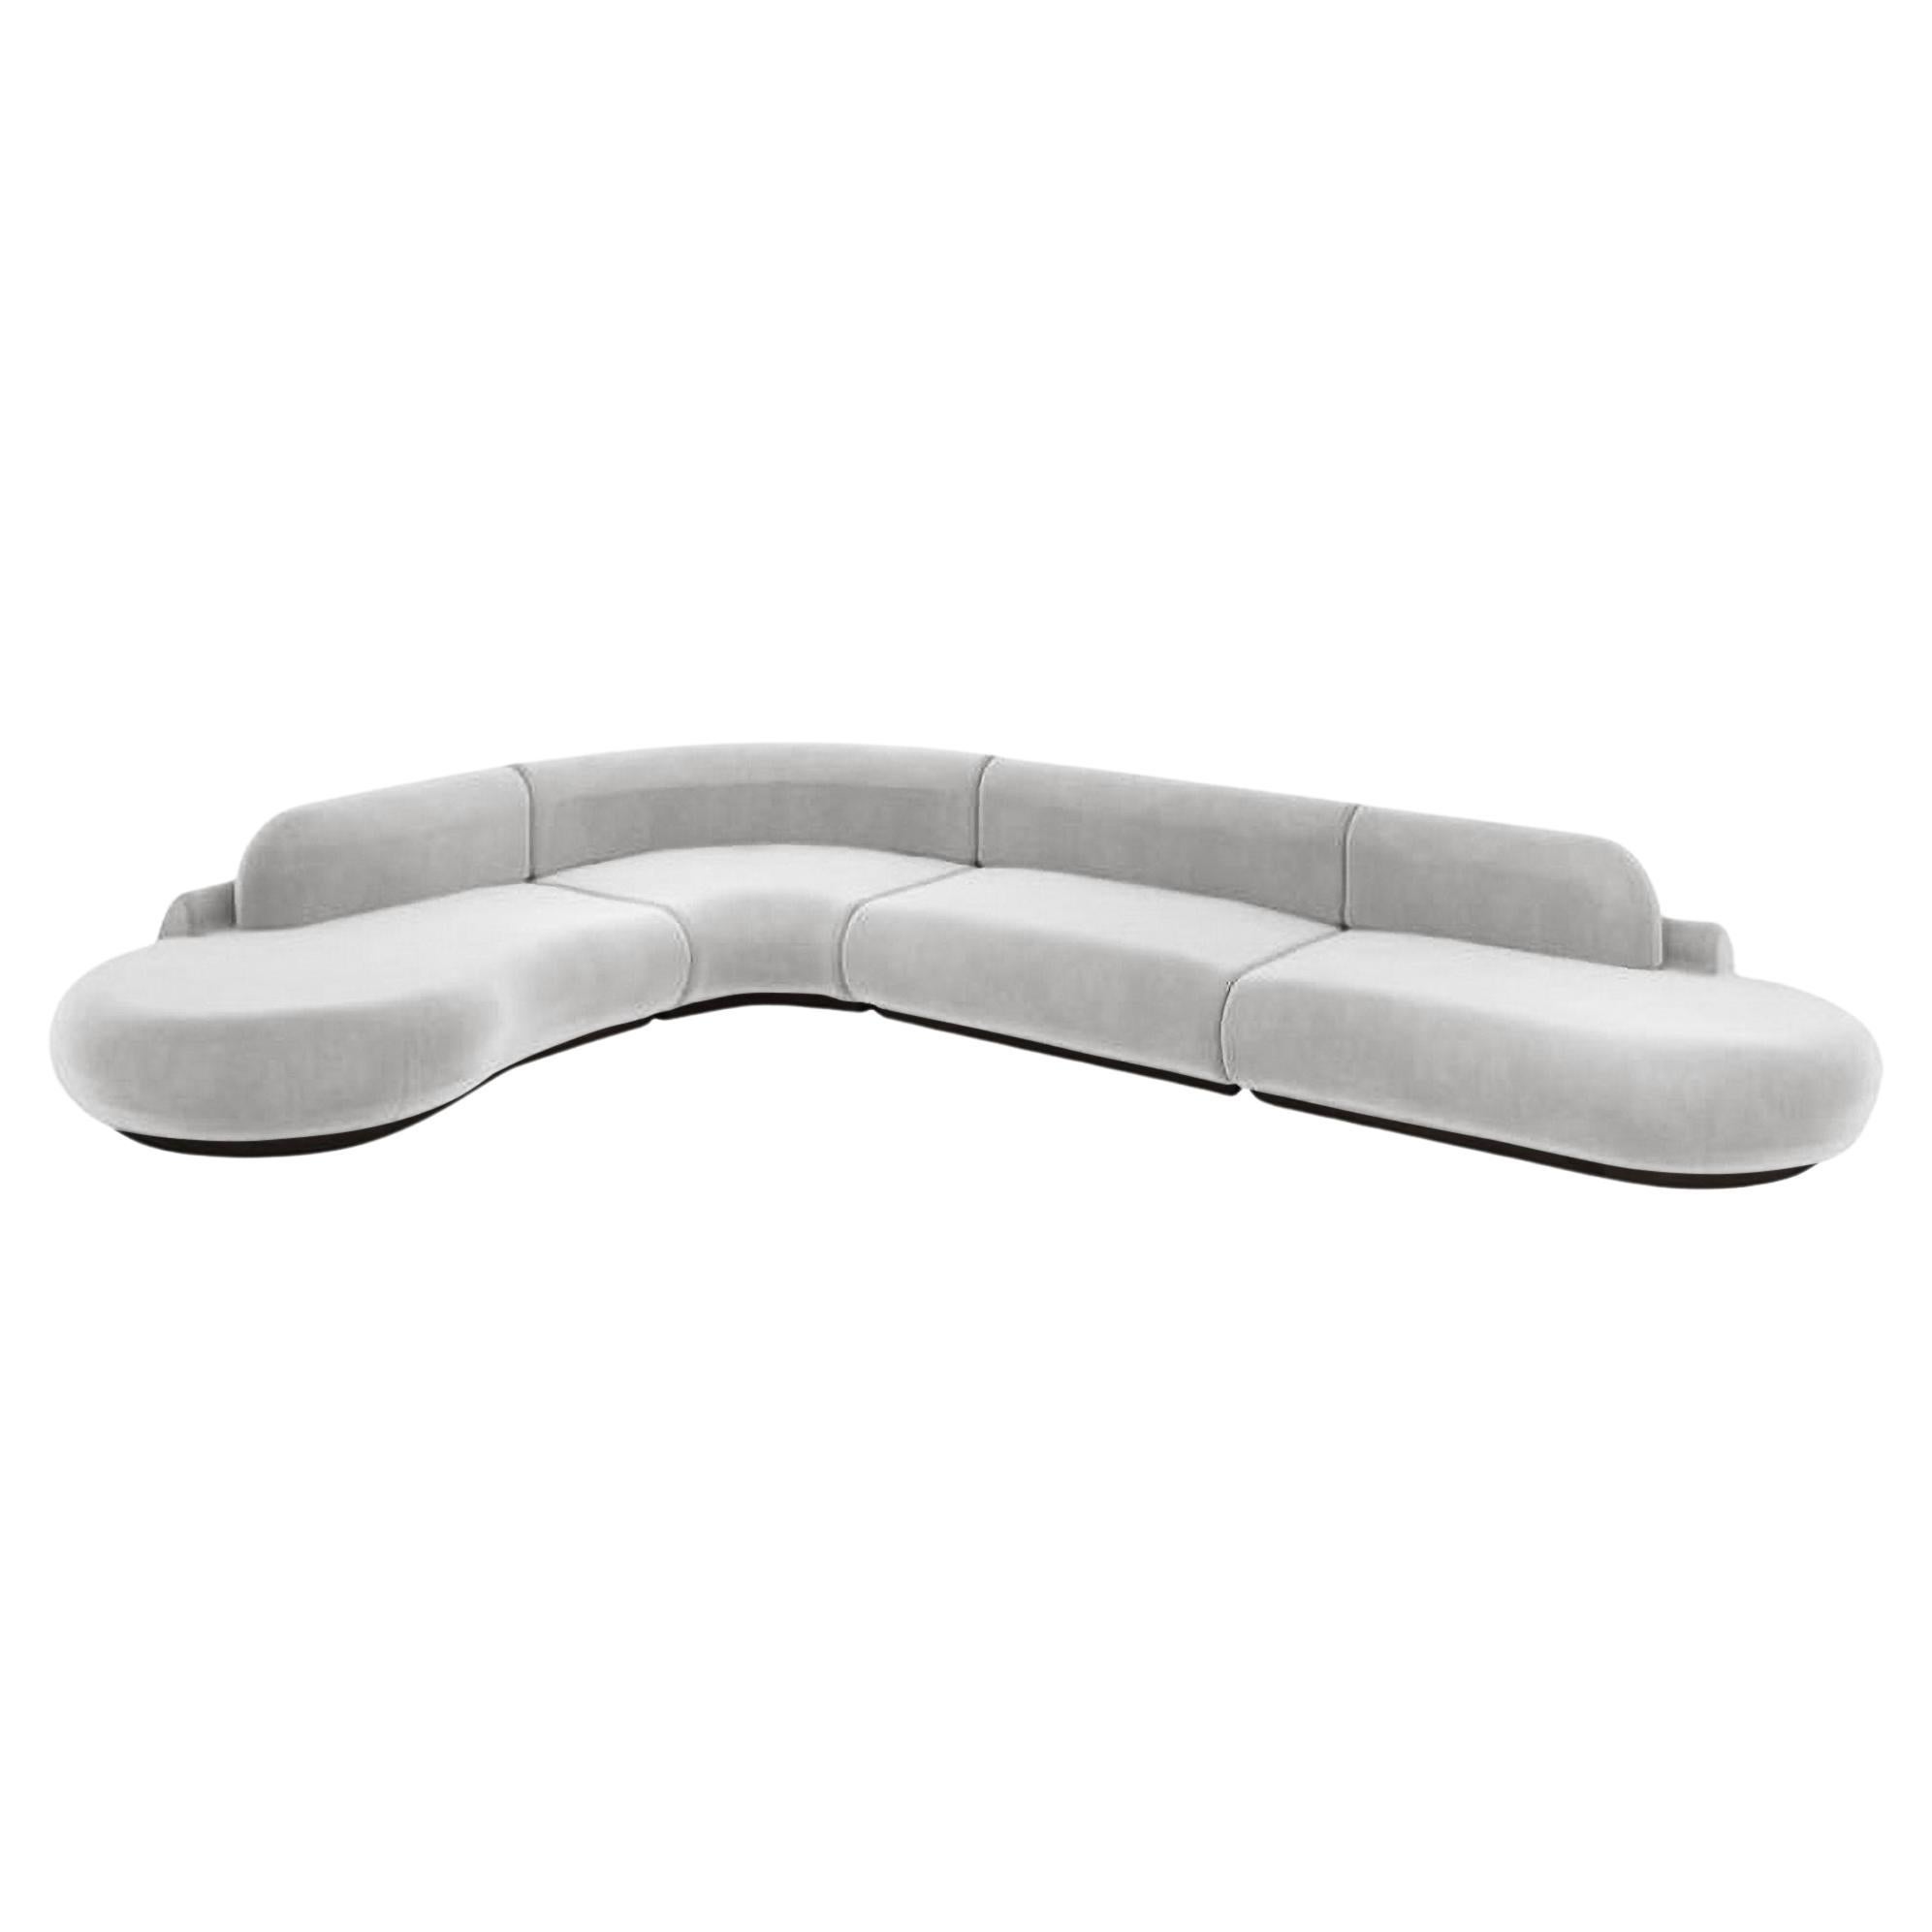 Naked Sectional Sofa, 4 Piece with Beech Ash-056-5 and Aluminium For Sale